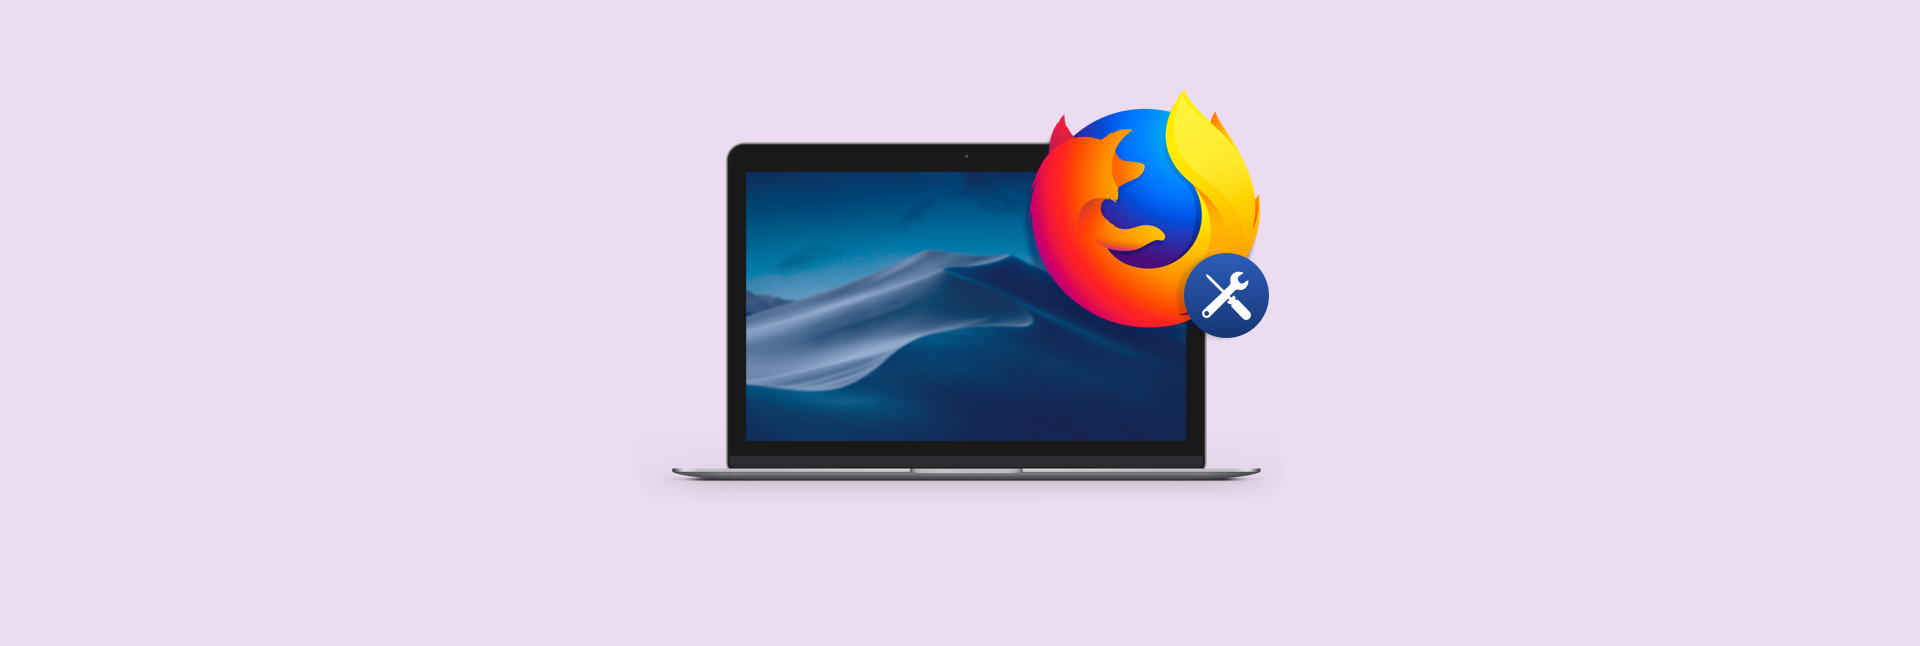 firefox older versions for mac 10.6.8